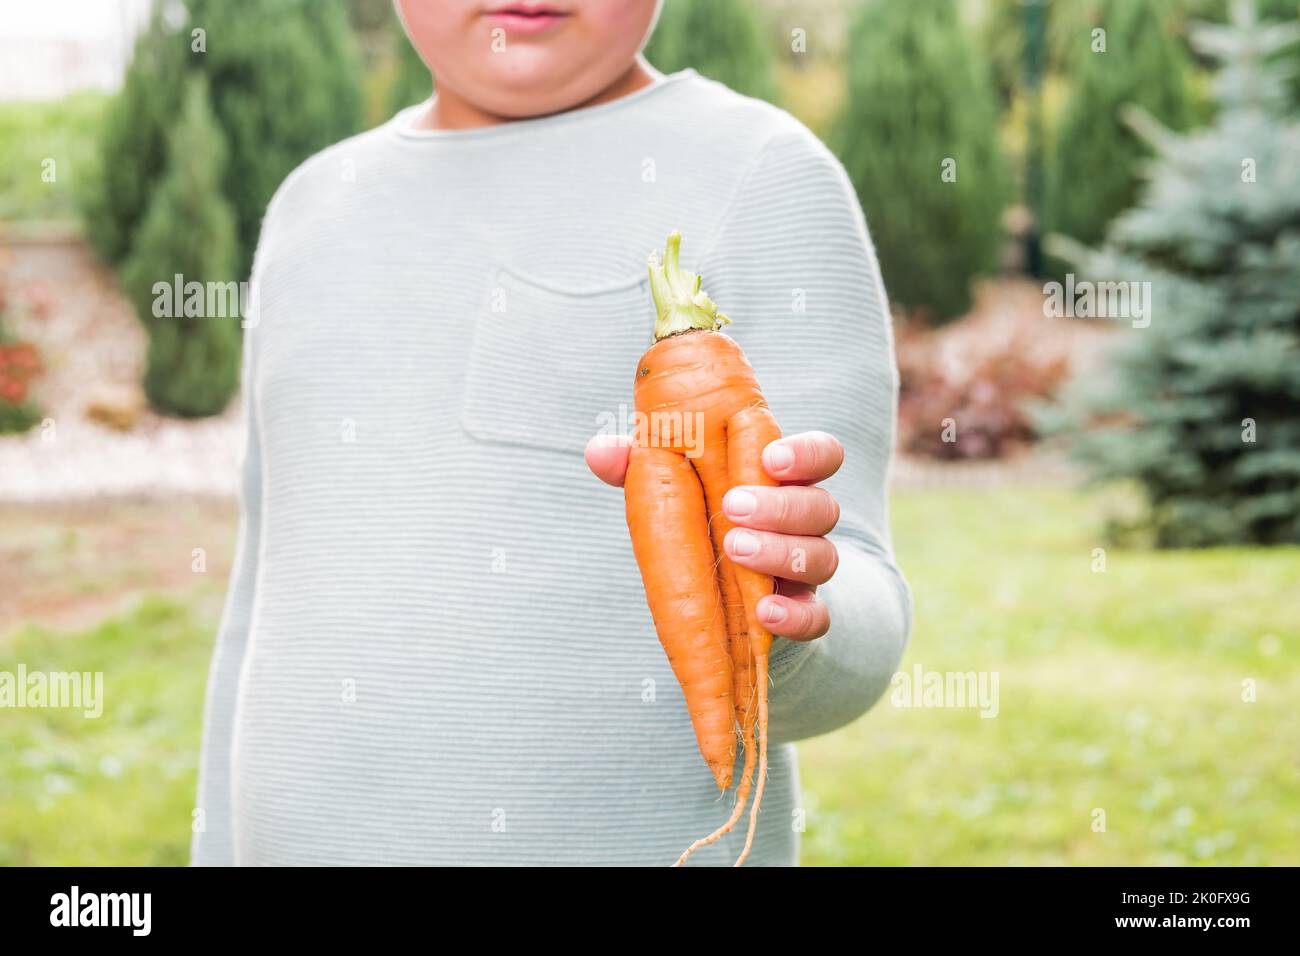 Boy holding imperfect home grown carrot in the hand. Vegetable with strange shape. Organic, fresh and ripe. Full of vitamin A and beta-carotene. Stock Photo